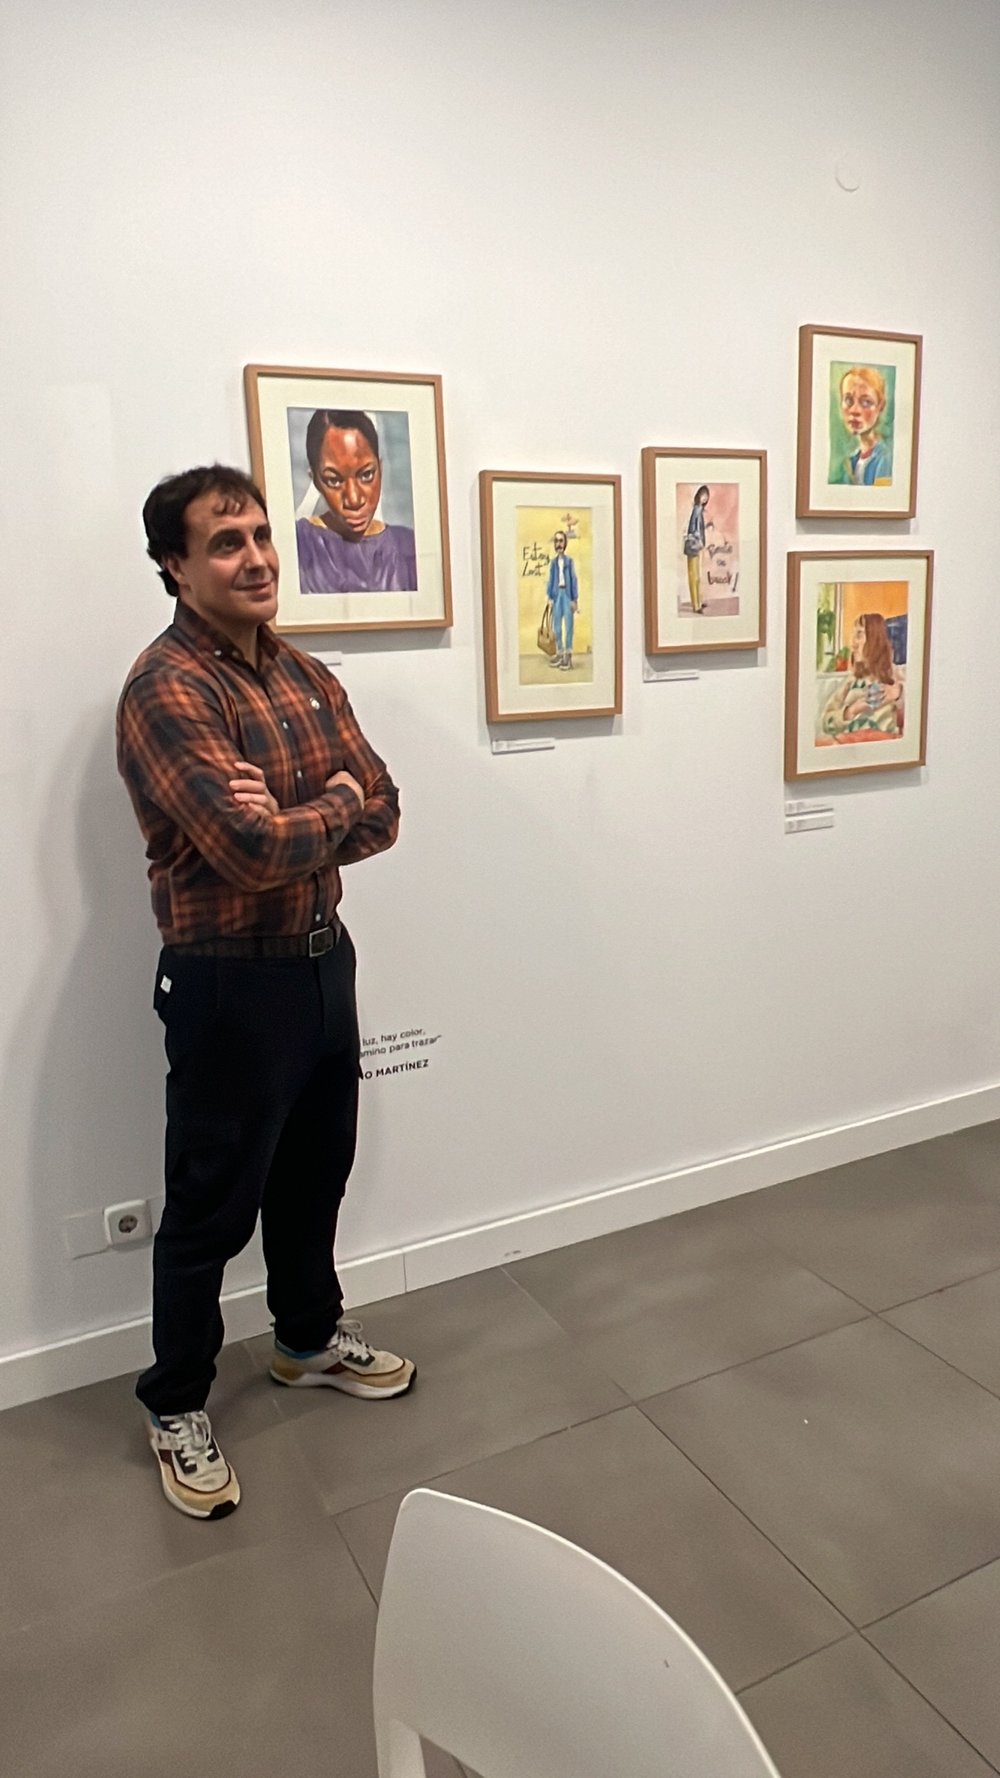 Bruno Martinez posing in front of his work